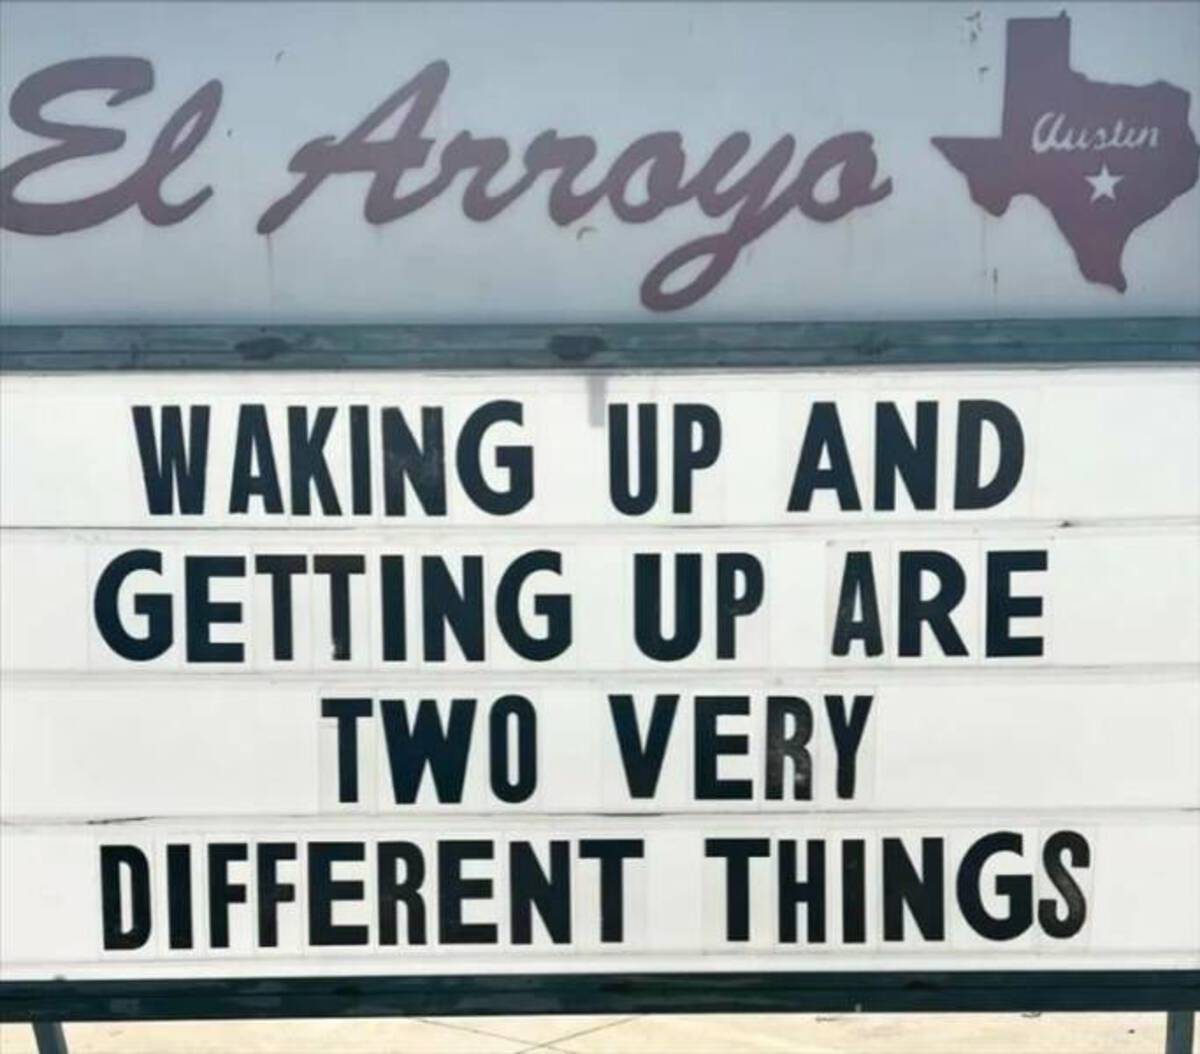 sign - El Arroyo Waking Up And Getting Up Are Two Very Austin Different Things